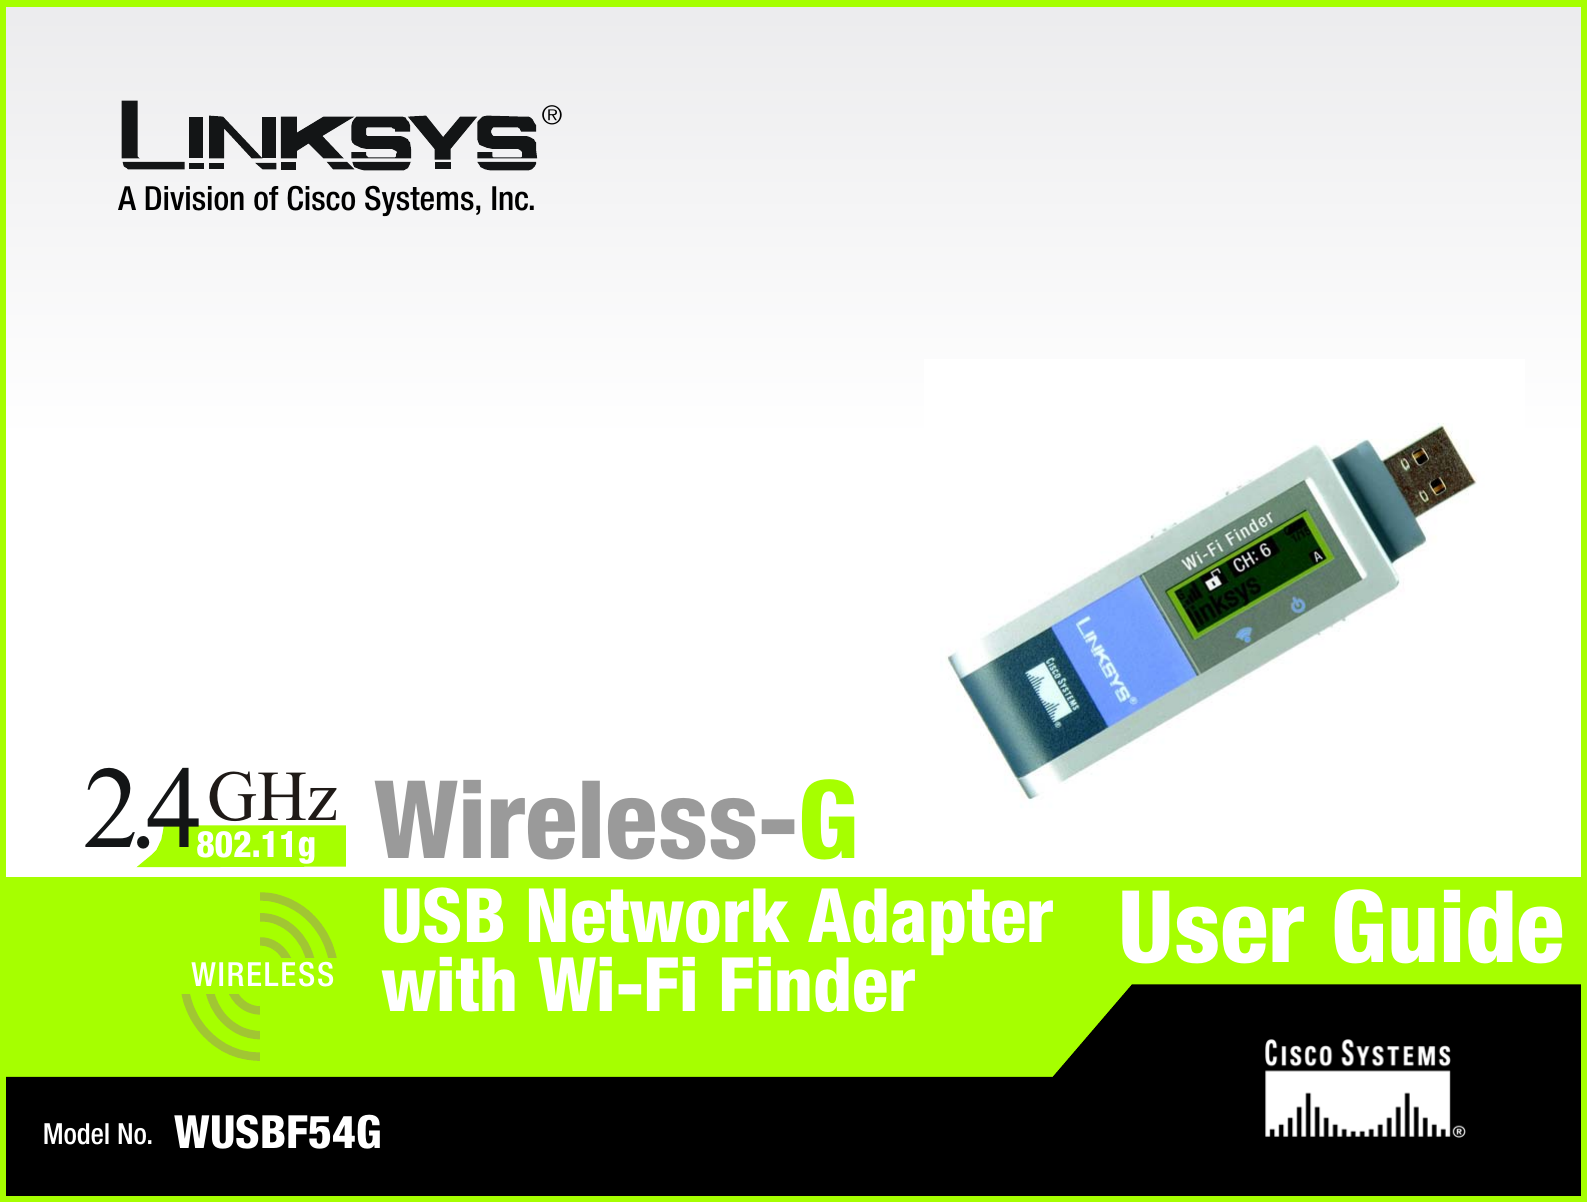 A Division of Cisco Systems, Inc.®Model No.USB Network AdapterWireless-GWUSBF54GUser GuideWIRELESSGHz2.4802.11gwith Wi-Fi Finder